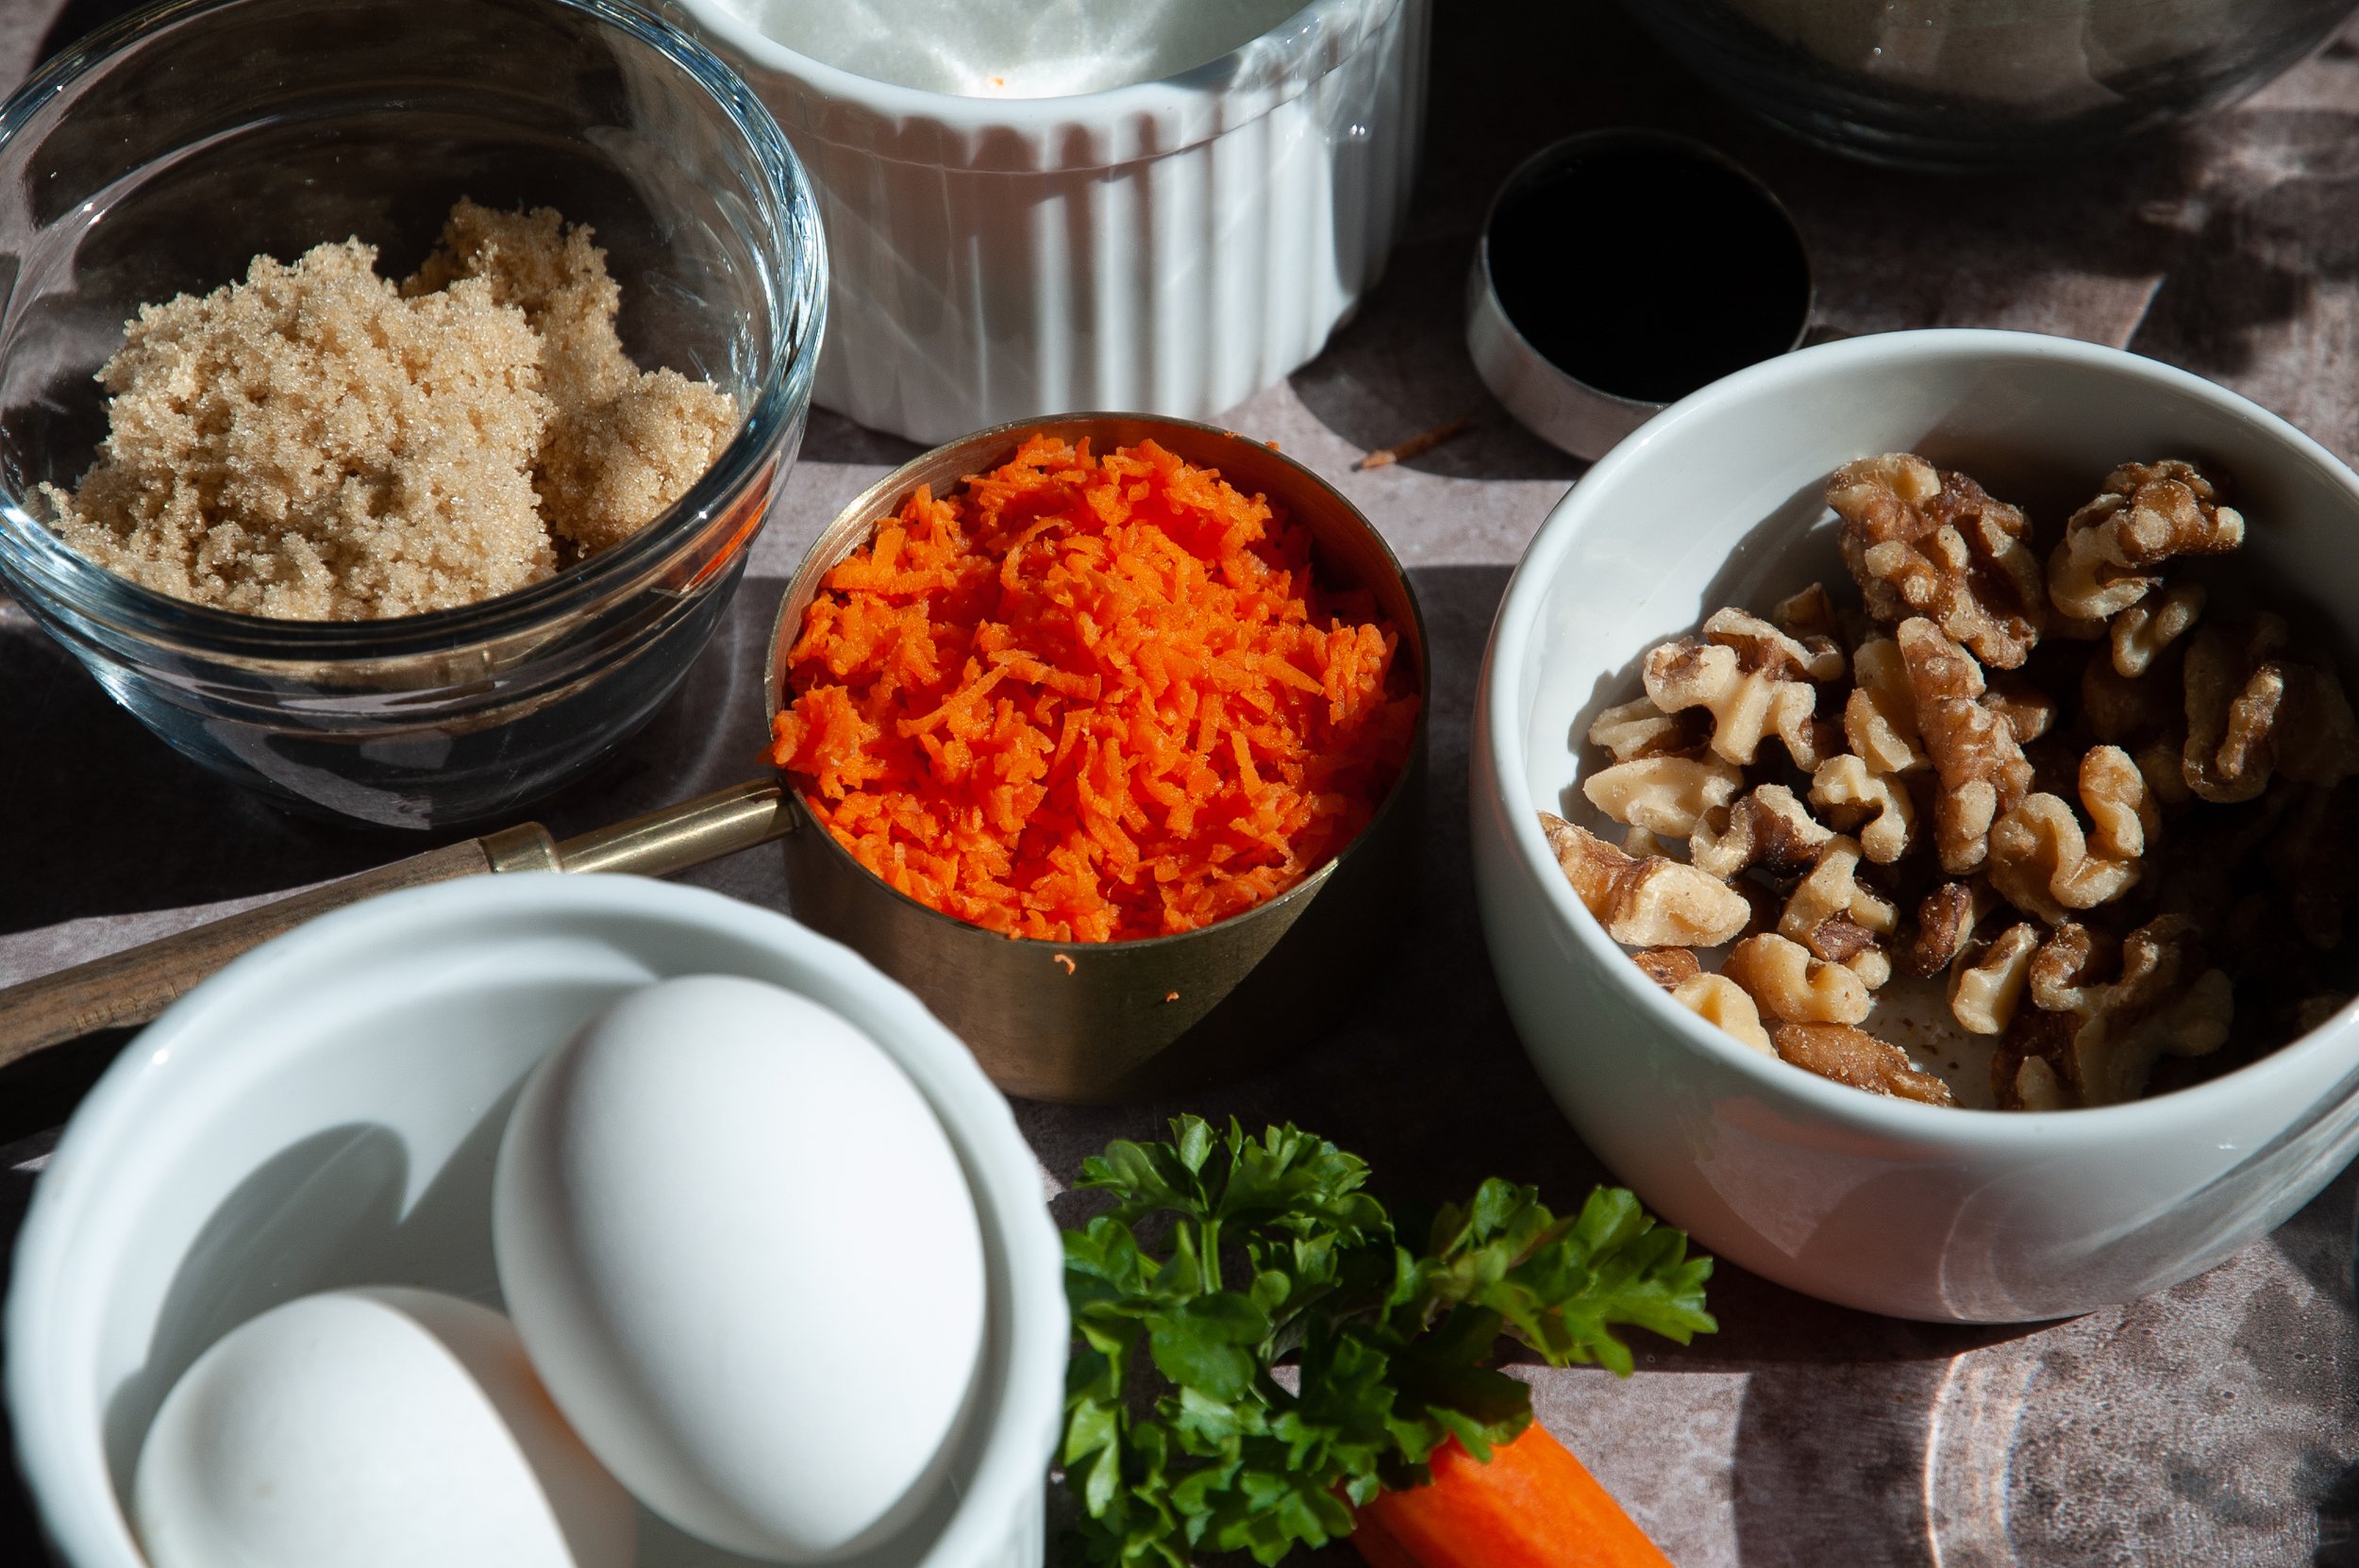 Ingredients for Gluten Free Carrot Cake Cookies